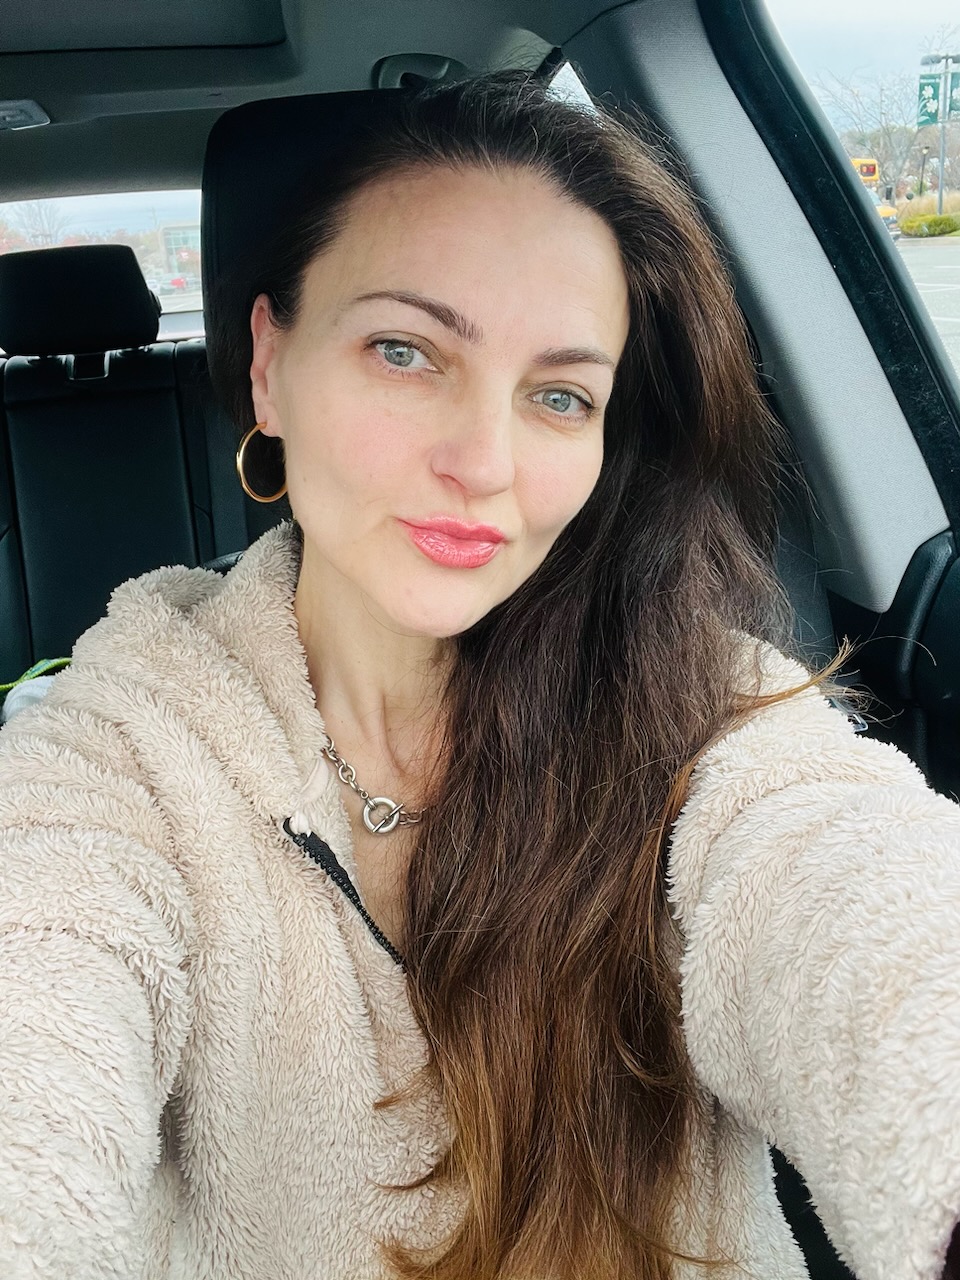 A woman with long brown hair takes a selfie while sitting in a car.